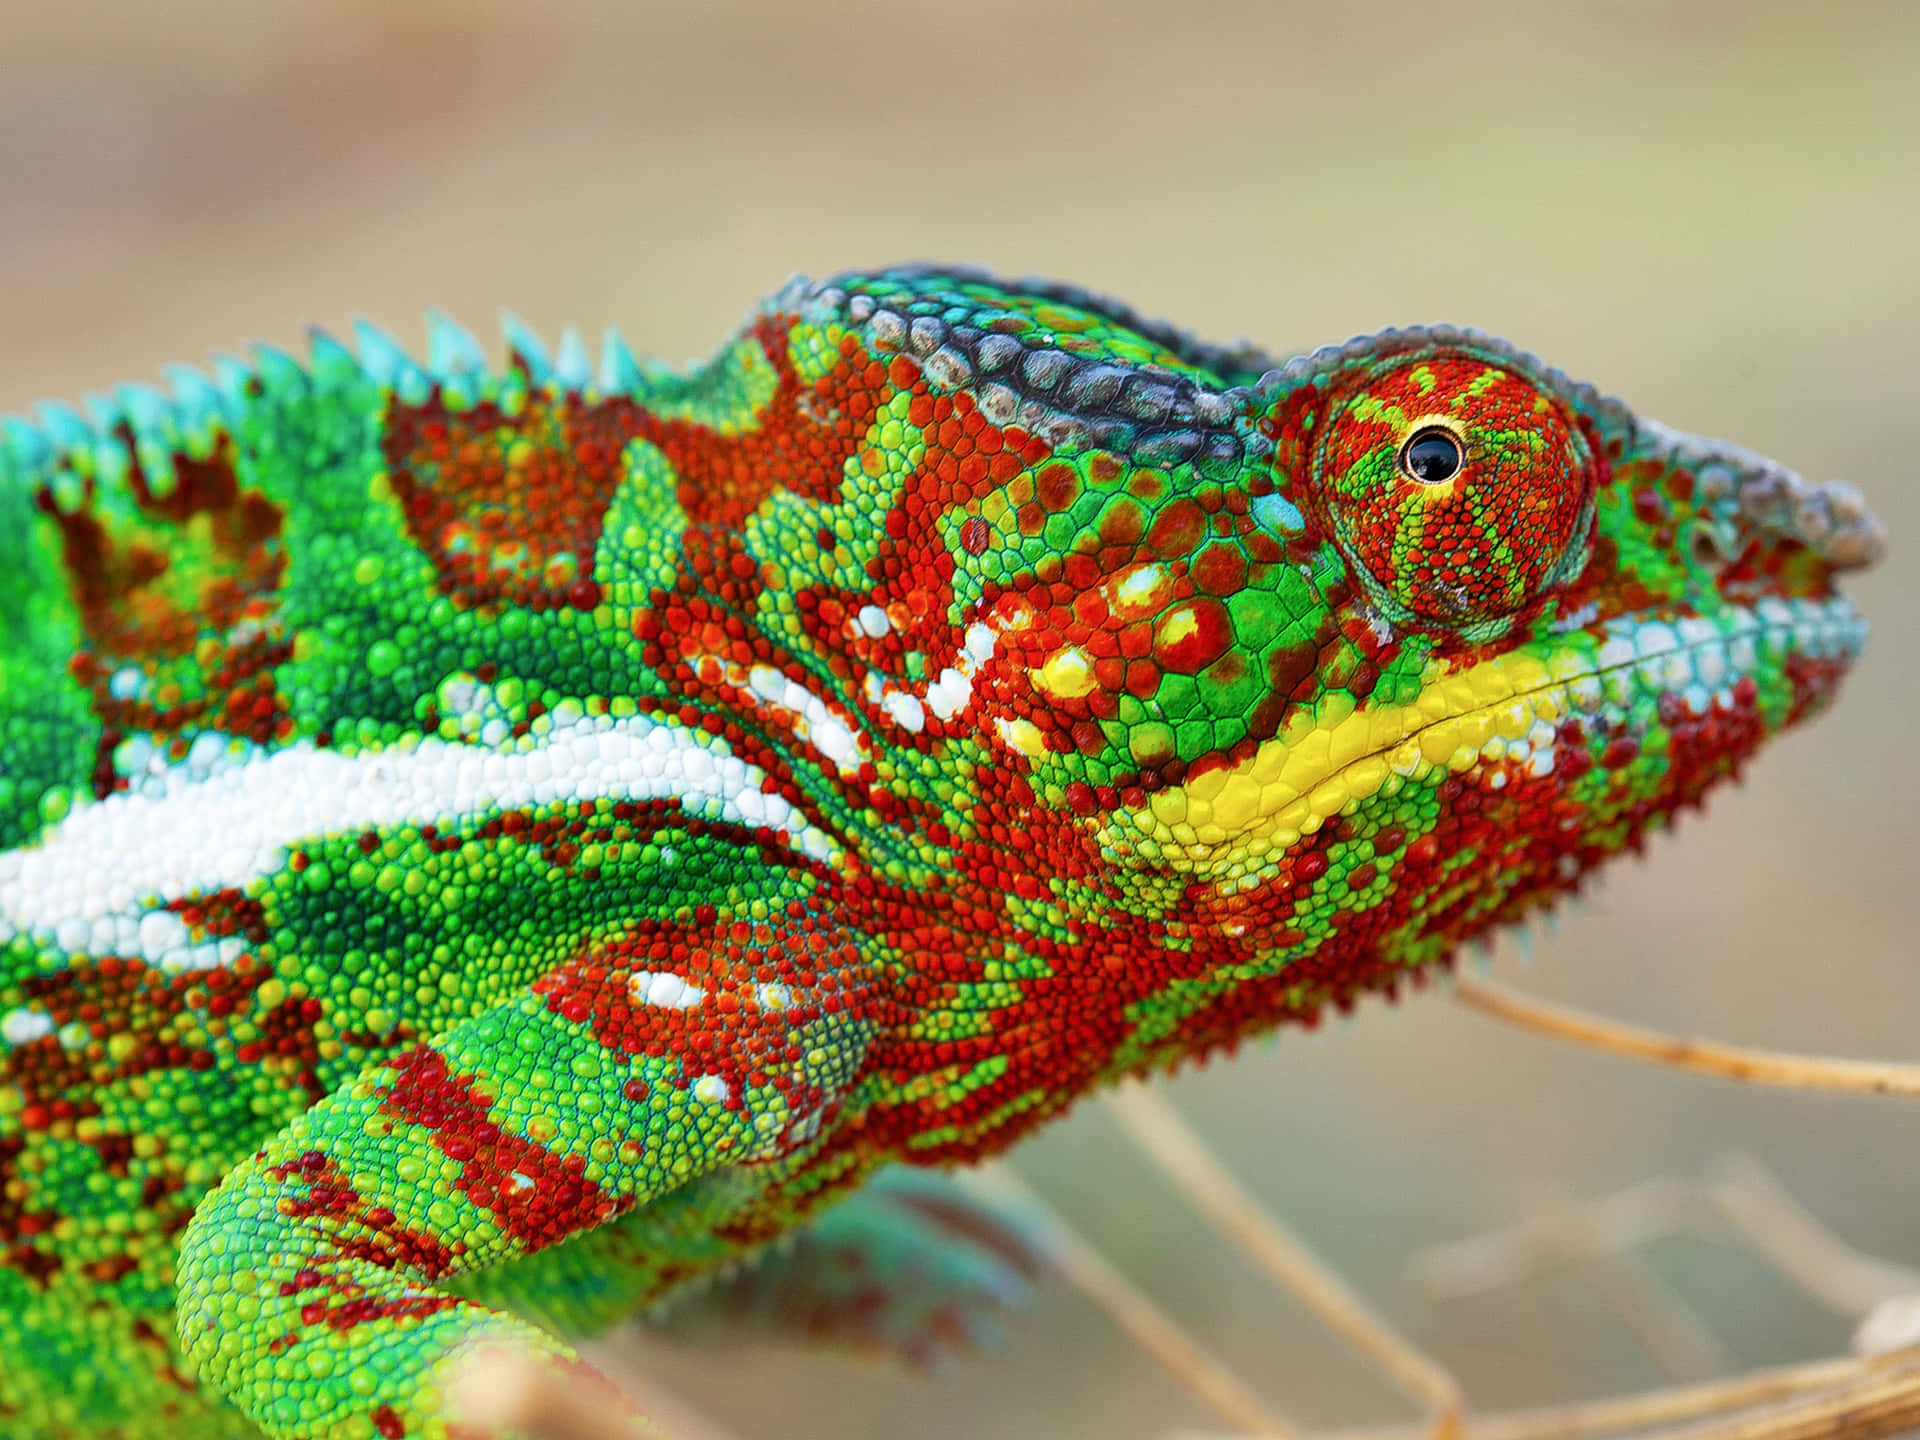 "A vibrant Chameleon climbing up a tree trunk"